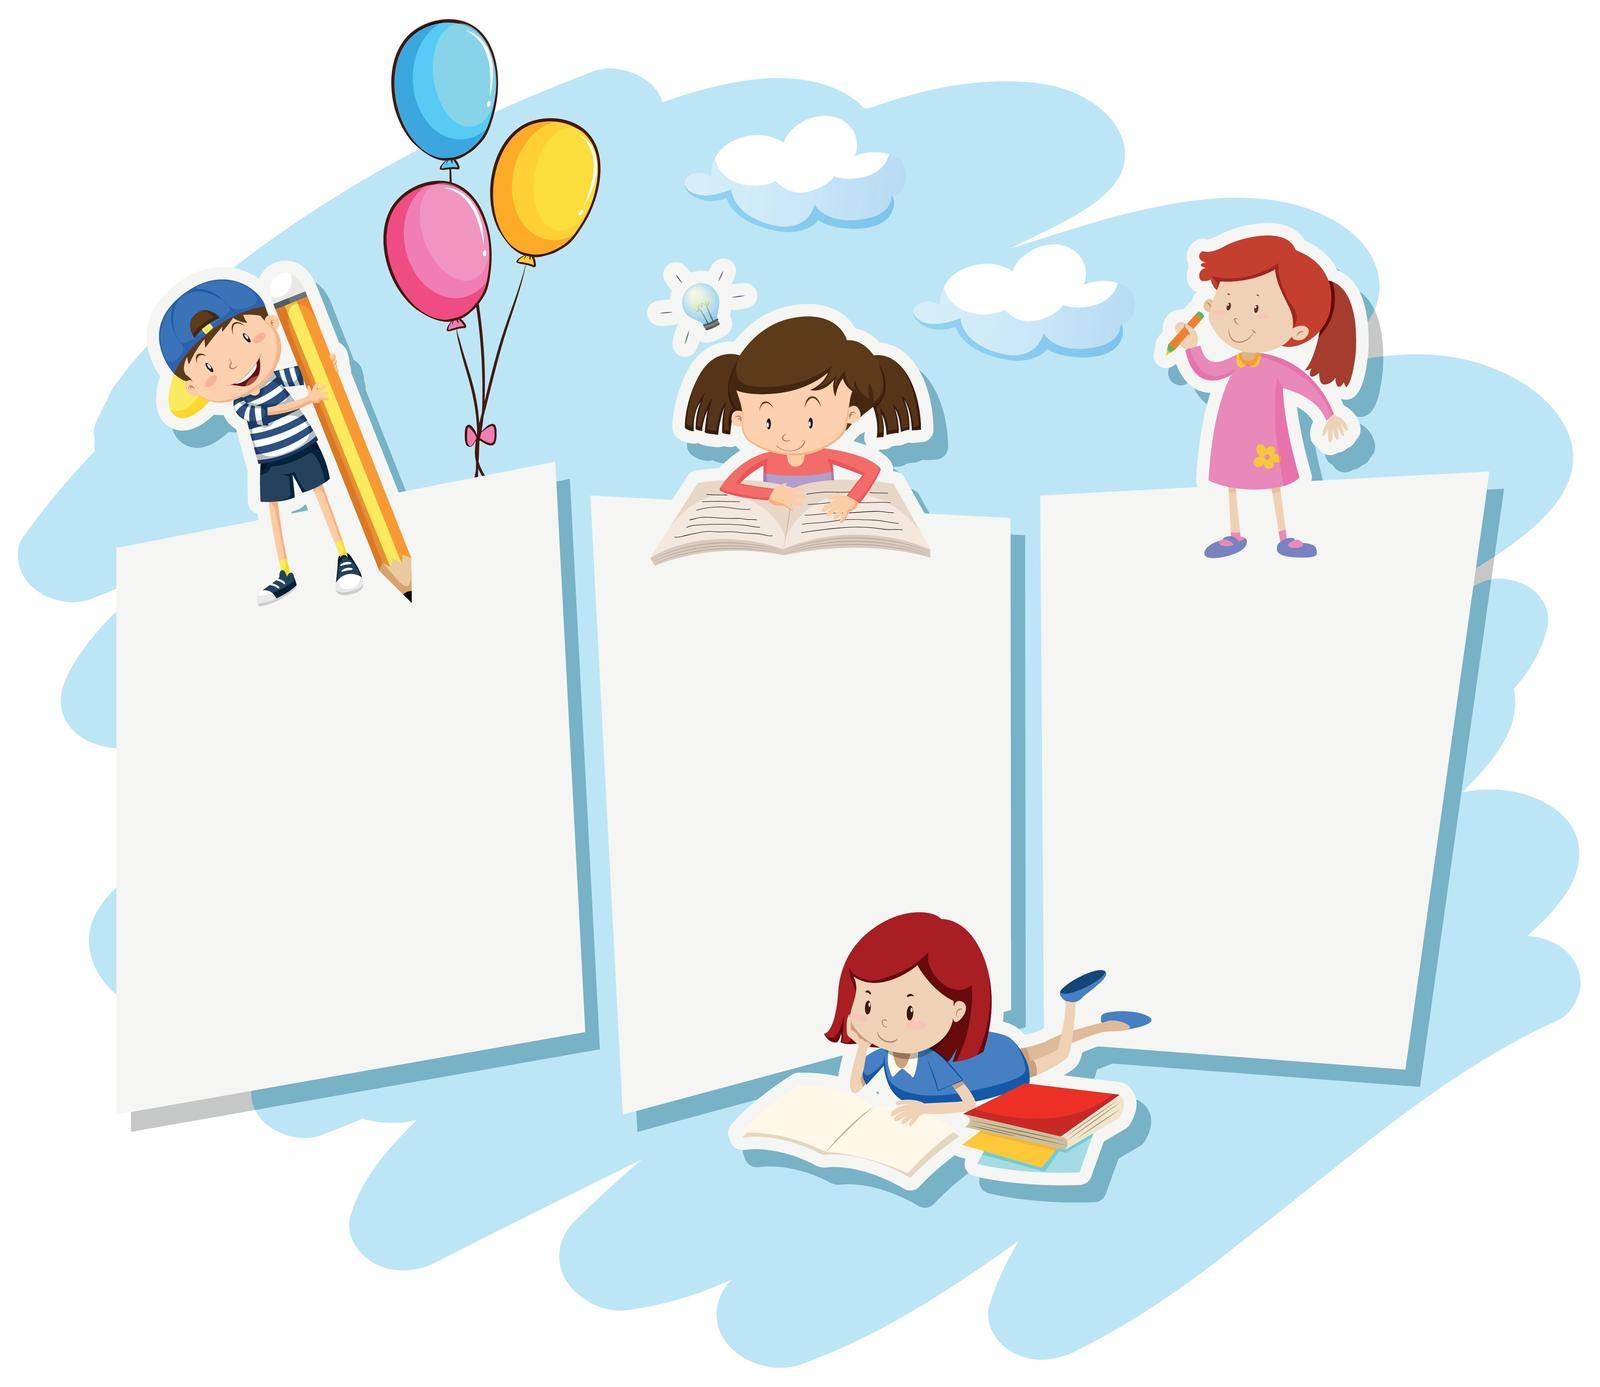 A Blank Note with Children illustration